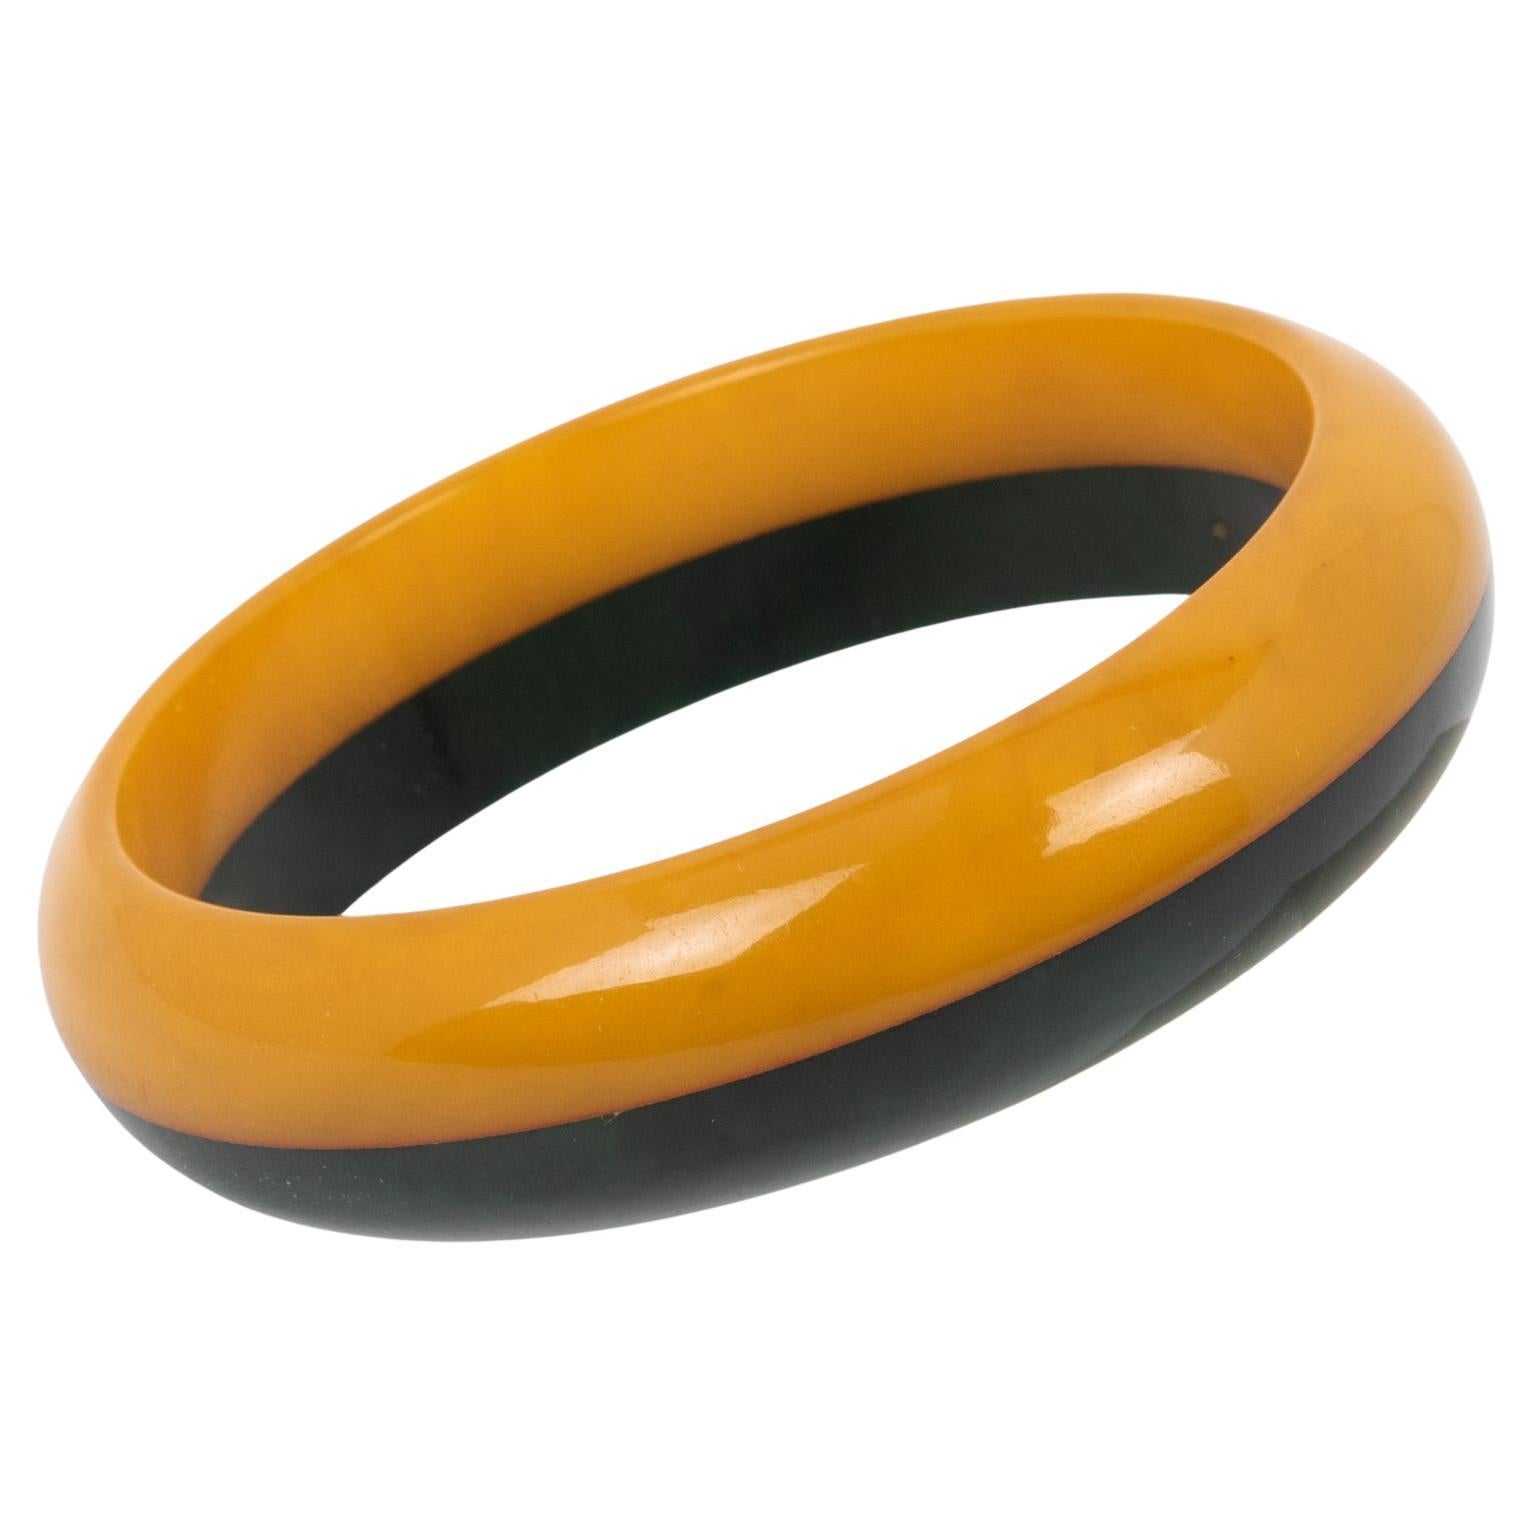 Bakelite Bracelet Laminated Layers Bangle Butterscotch and Green Marble